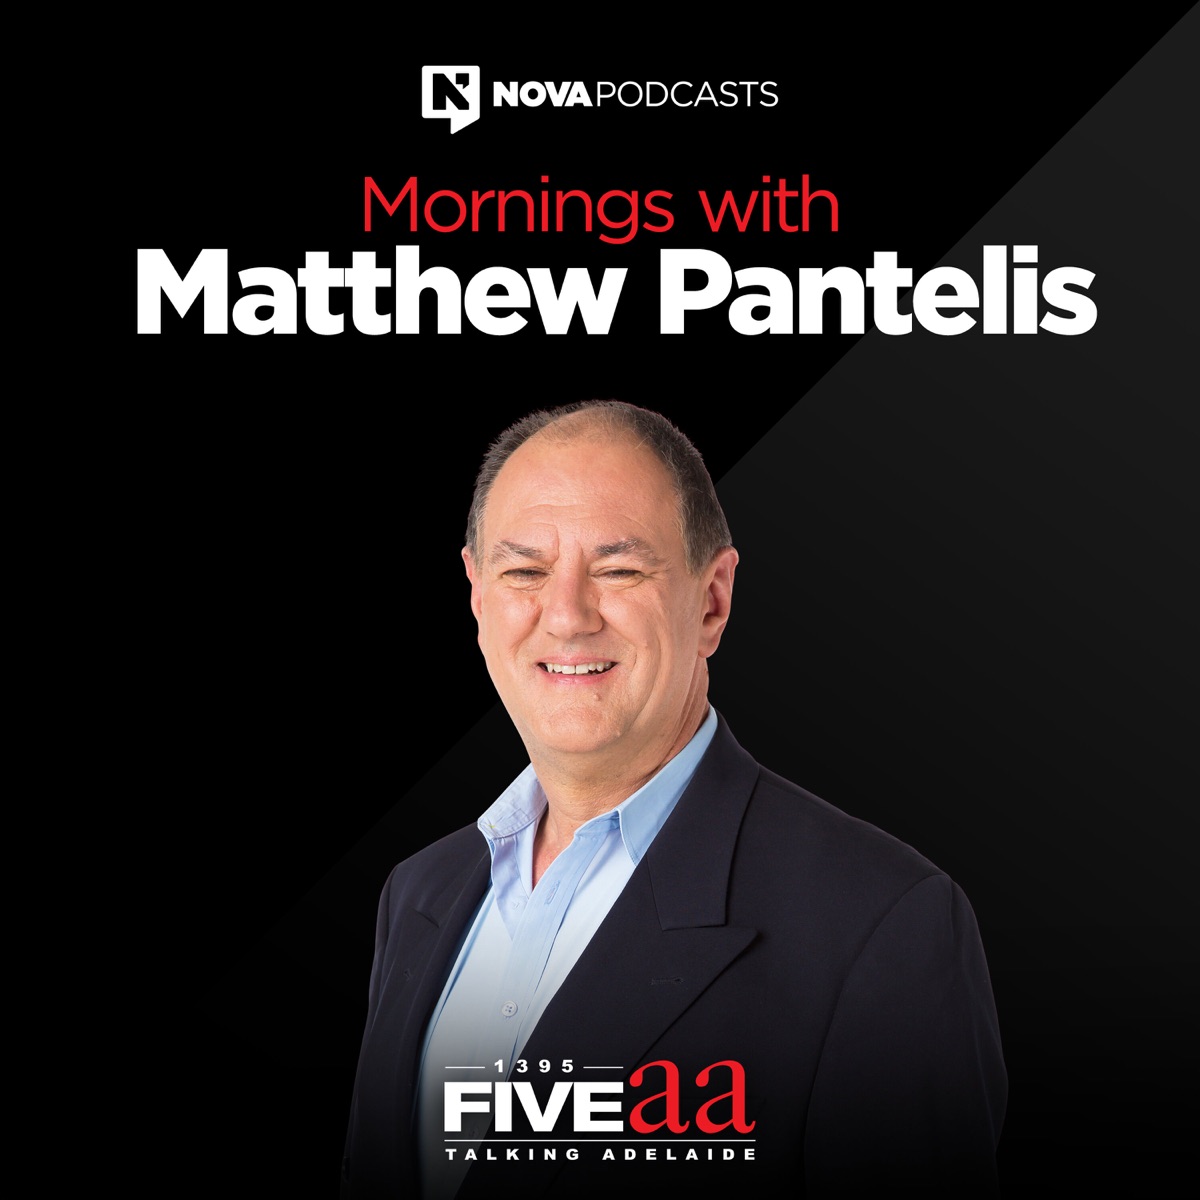 Mornings with Matthew Pantelis – Podcast – Podtail